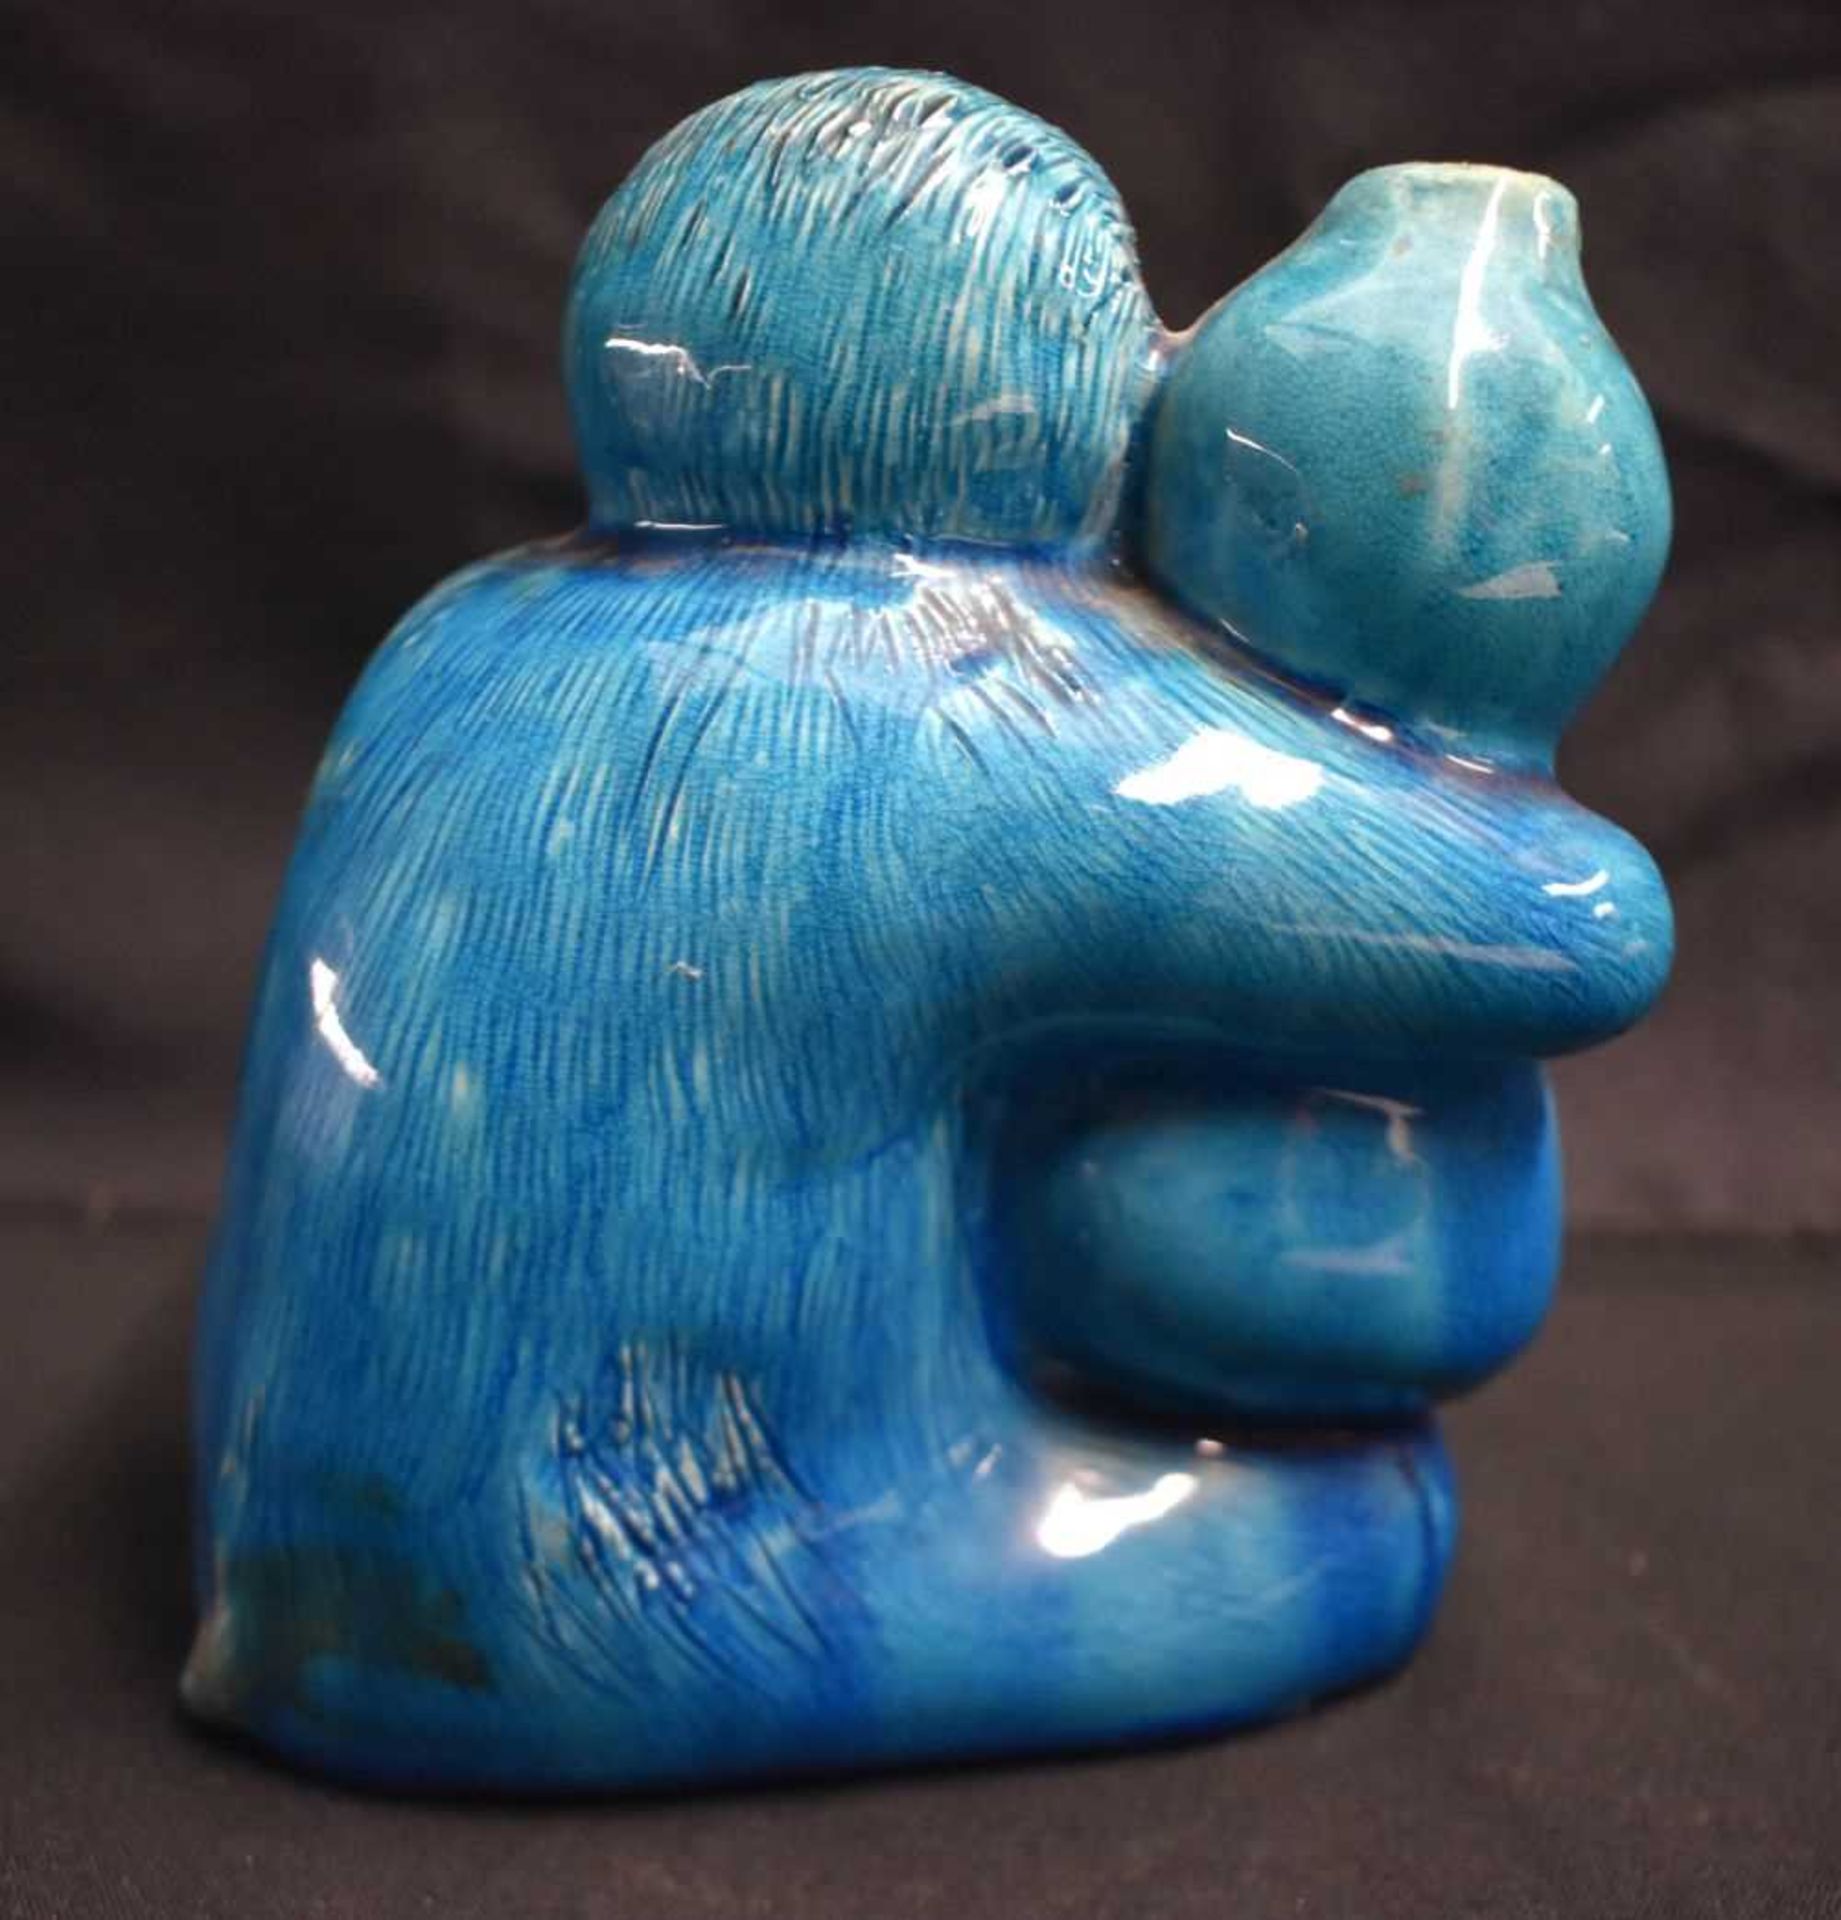 AN UNUSUAL 19TH CENTURY CHINESE BLUE GLAZED PORCELAIN MONKEY GOURD VASE or possibly Burmantofts. - Image 3 of 6